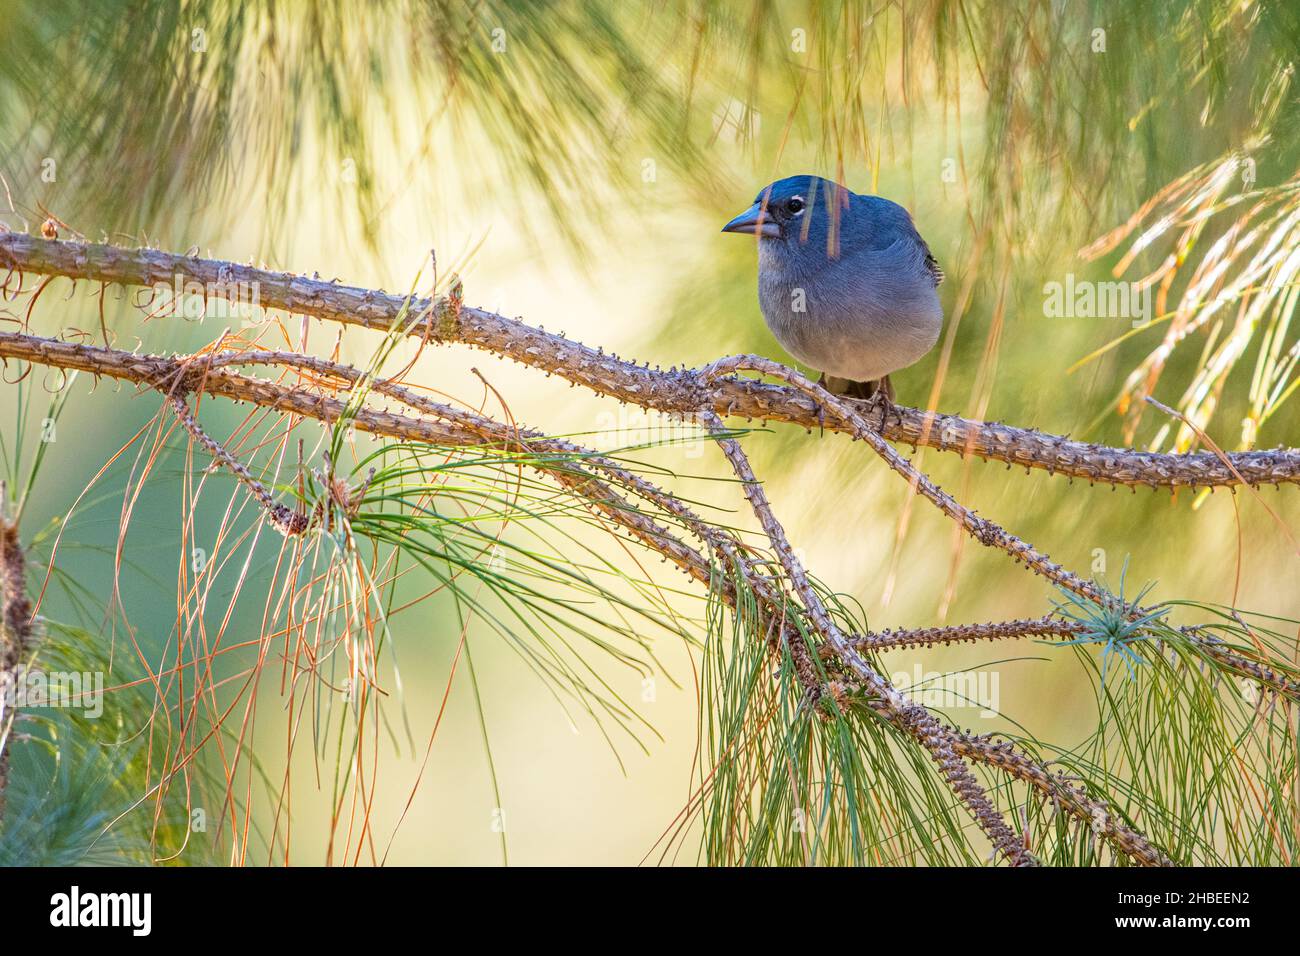 Tenerife blue chaffinch (Fringilla teydea teydea), male of the nominal subspecies endemic to Tenerife. Stock Photo